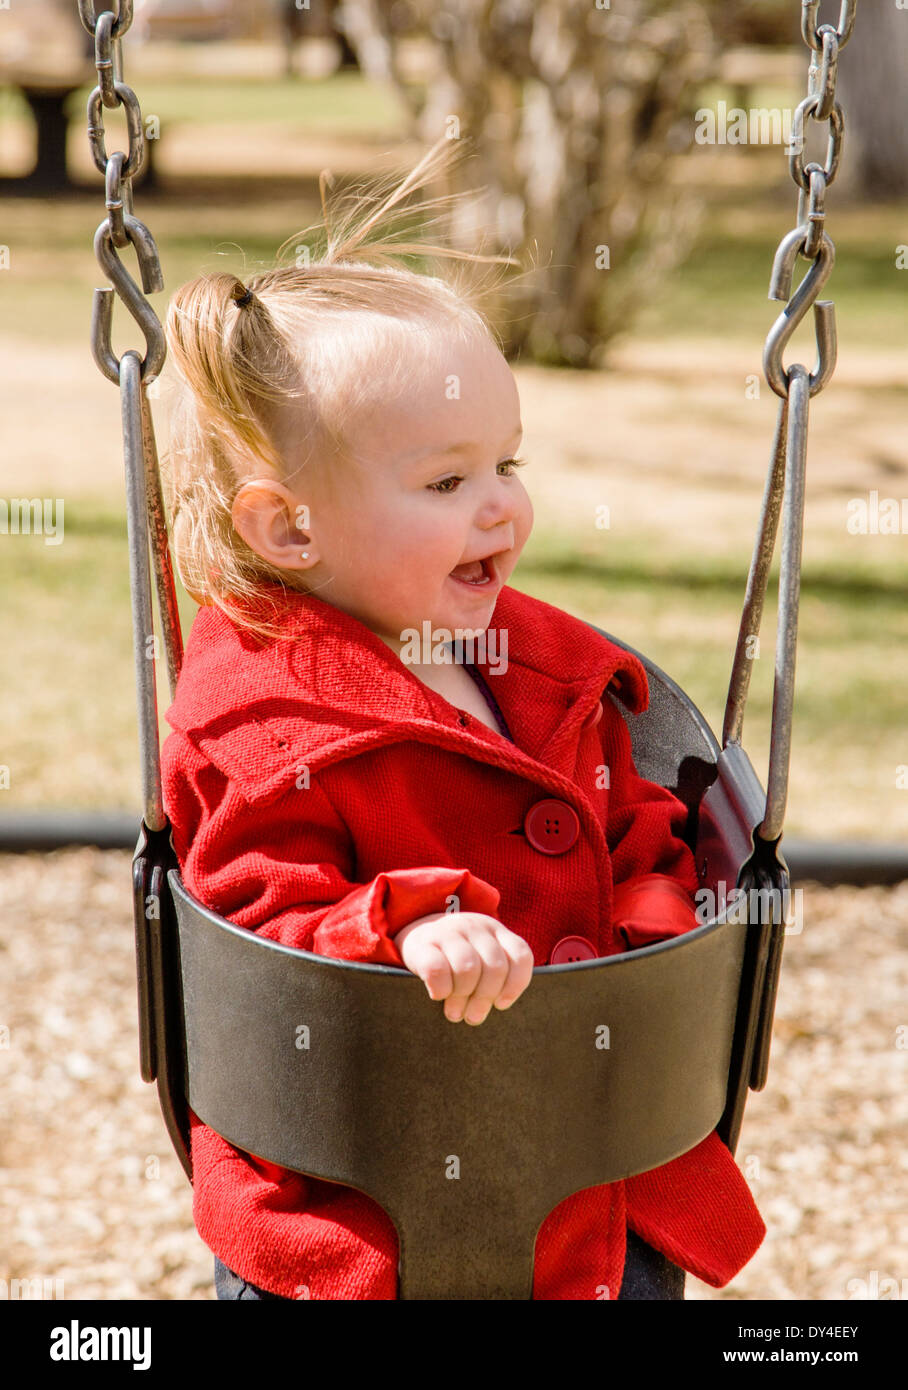 Adorable, cute 16 month little girl swinging on a park playground Stock Photo